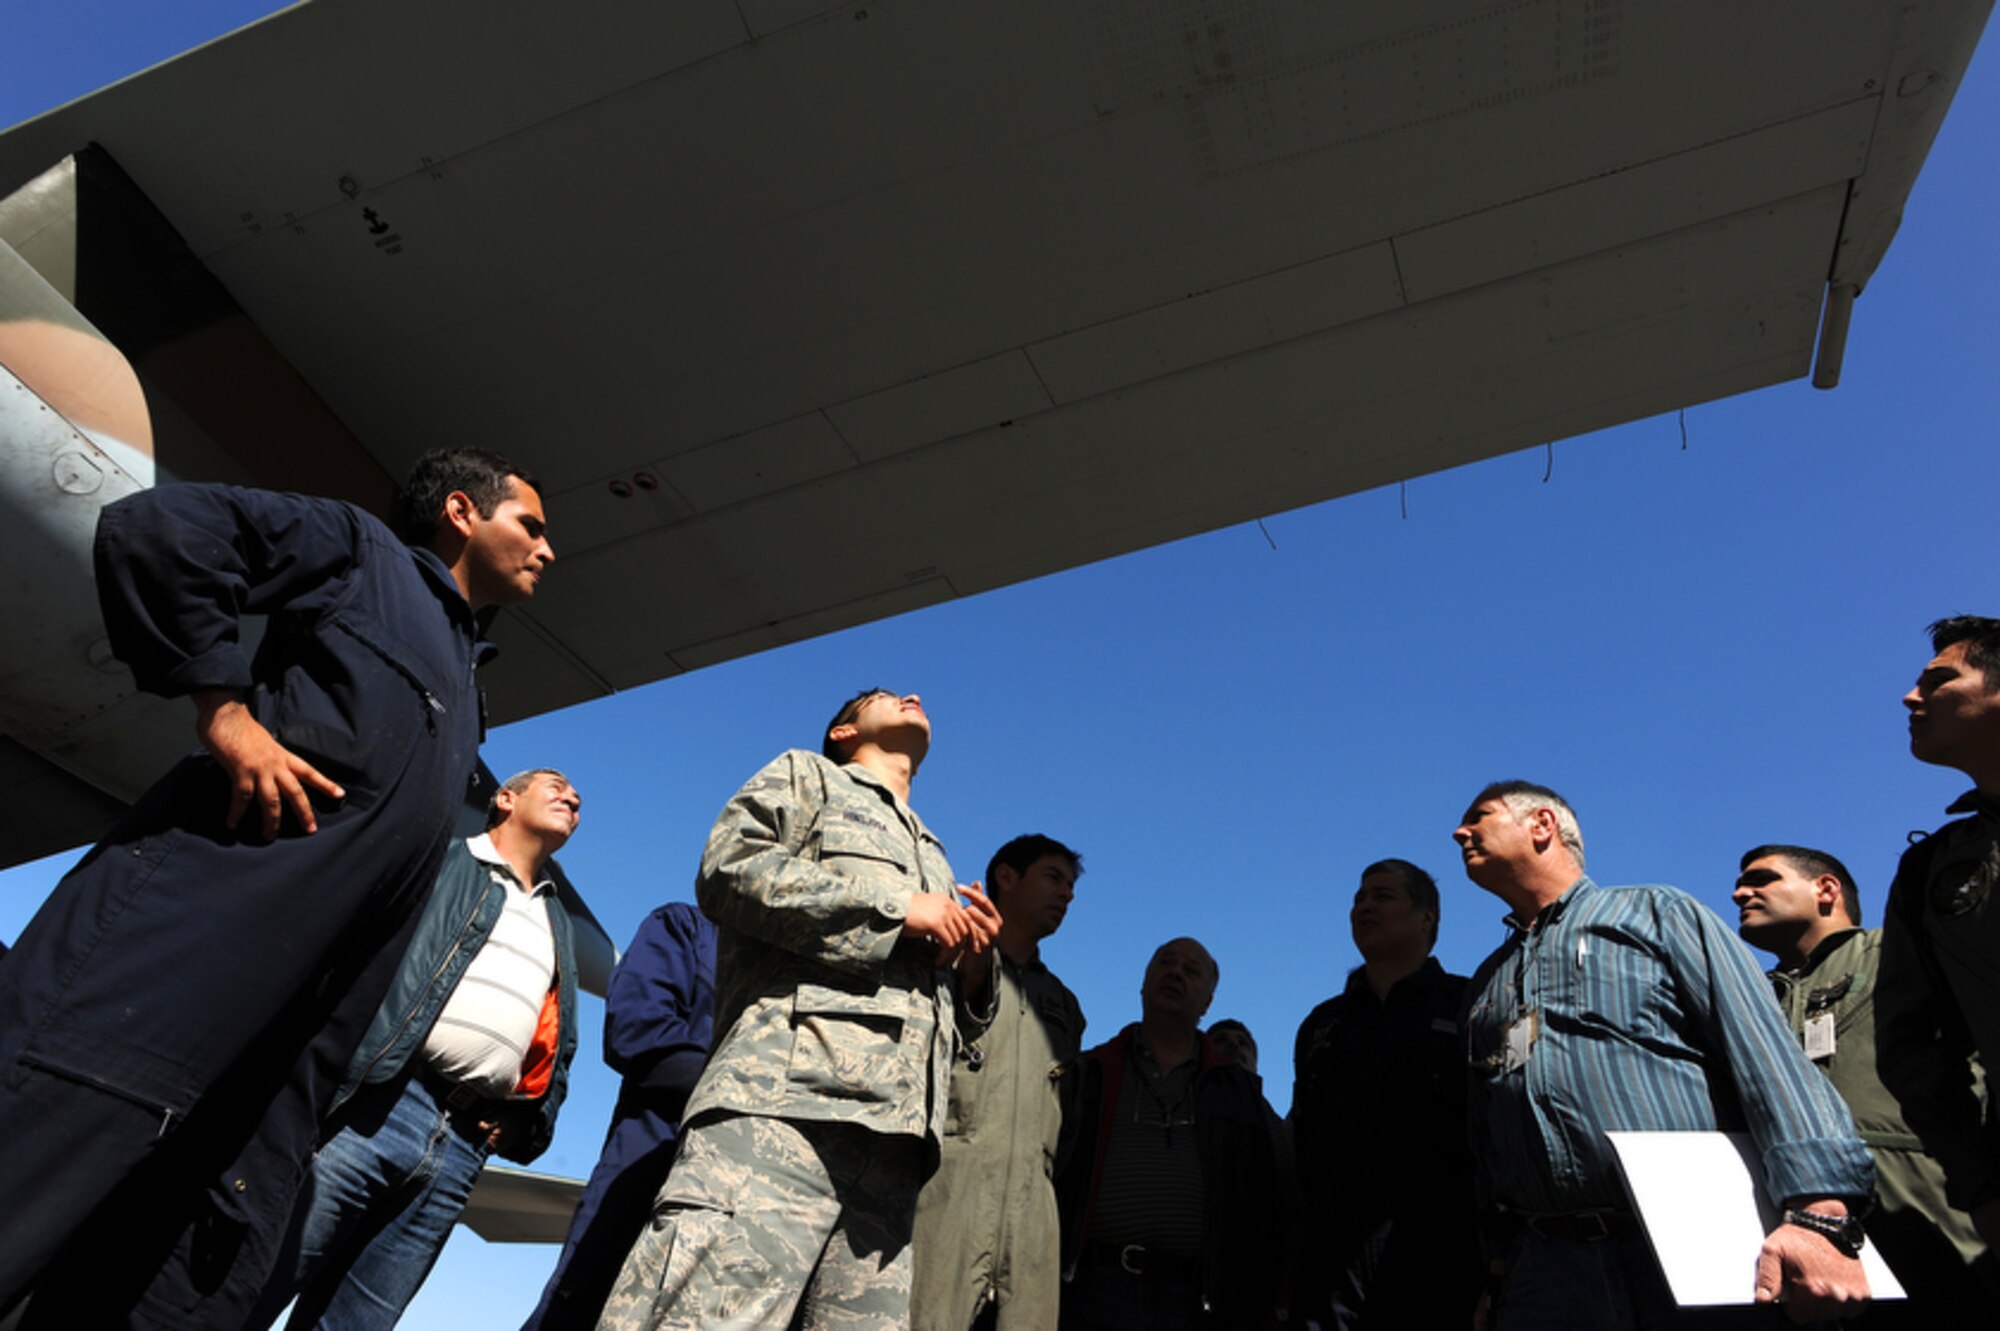 Staff Sgt. David Hinojosa (center) checks for structural damage to Argentinean air force C-130 Hercules' wing during an aircraft maintenance evaluation at Palomar Air Base, Buenos Aires, Argentina during Operation Southern Partner Oct. 30. Operation Southern Partner is an in-depth, two-week subject matter exchange emphasizing partnership, cooperation and sharing of information with partner nation Air Forces in Latin America. Staff Sgt. Hinojosa is an aircraft structural maintenance instructor for the Inter-American Air Force Academy at Lackland Air Force Base, Texas.(DMA-SA photo/Staff Sgt. Bennie J. Davis III) 